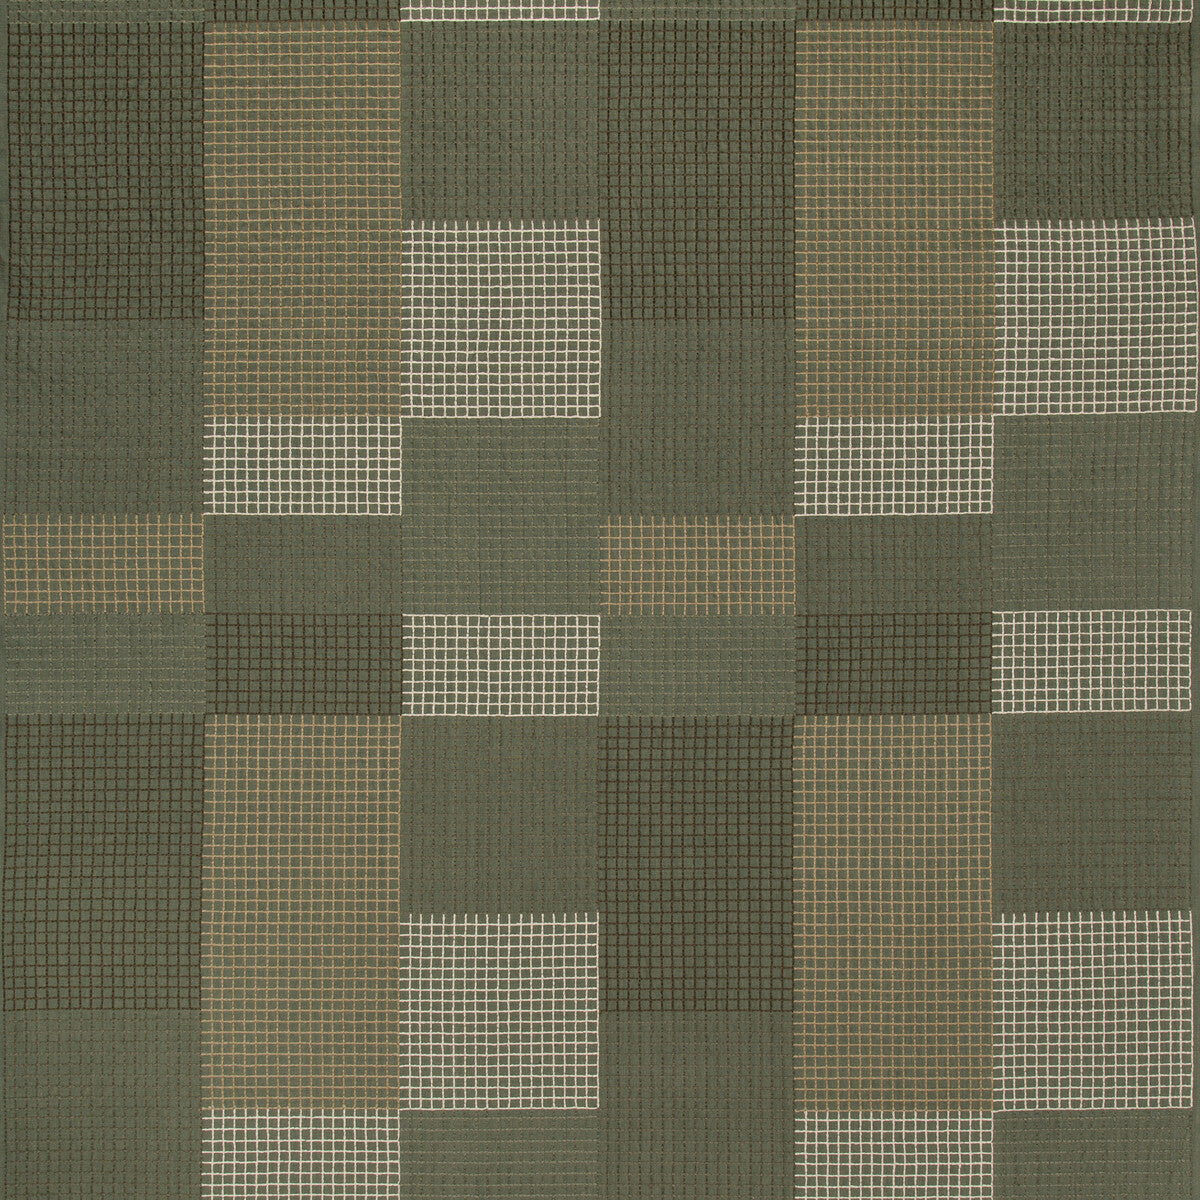 Gridlock fabric in hunter color - pattern GWF-3756.316.0 - by Lee Jofa Modern in the Kelly Wearstler V collection